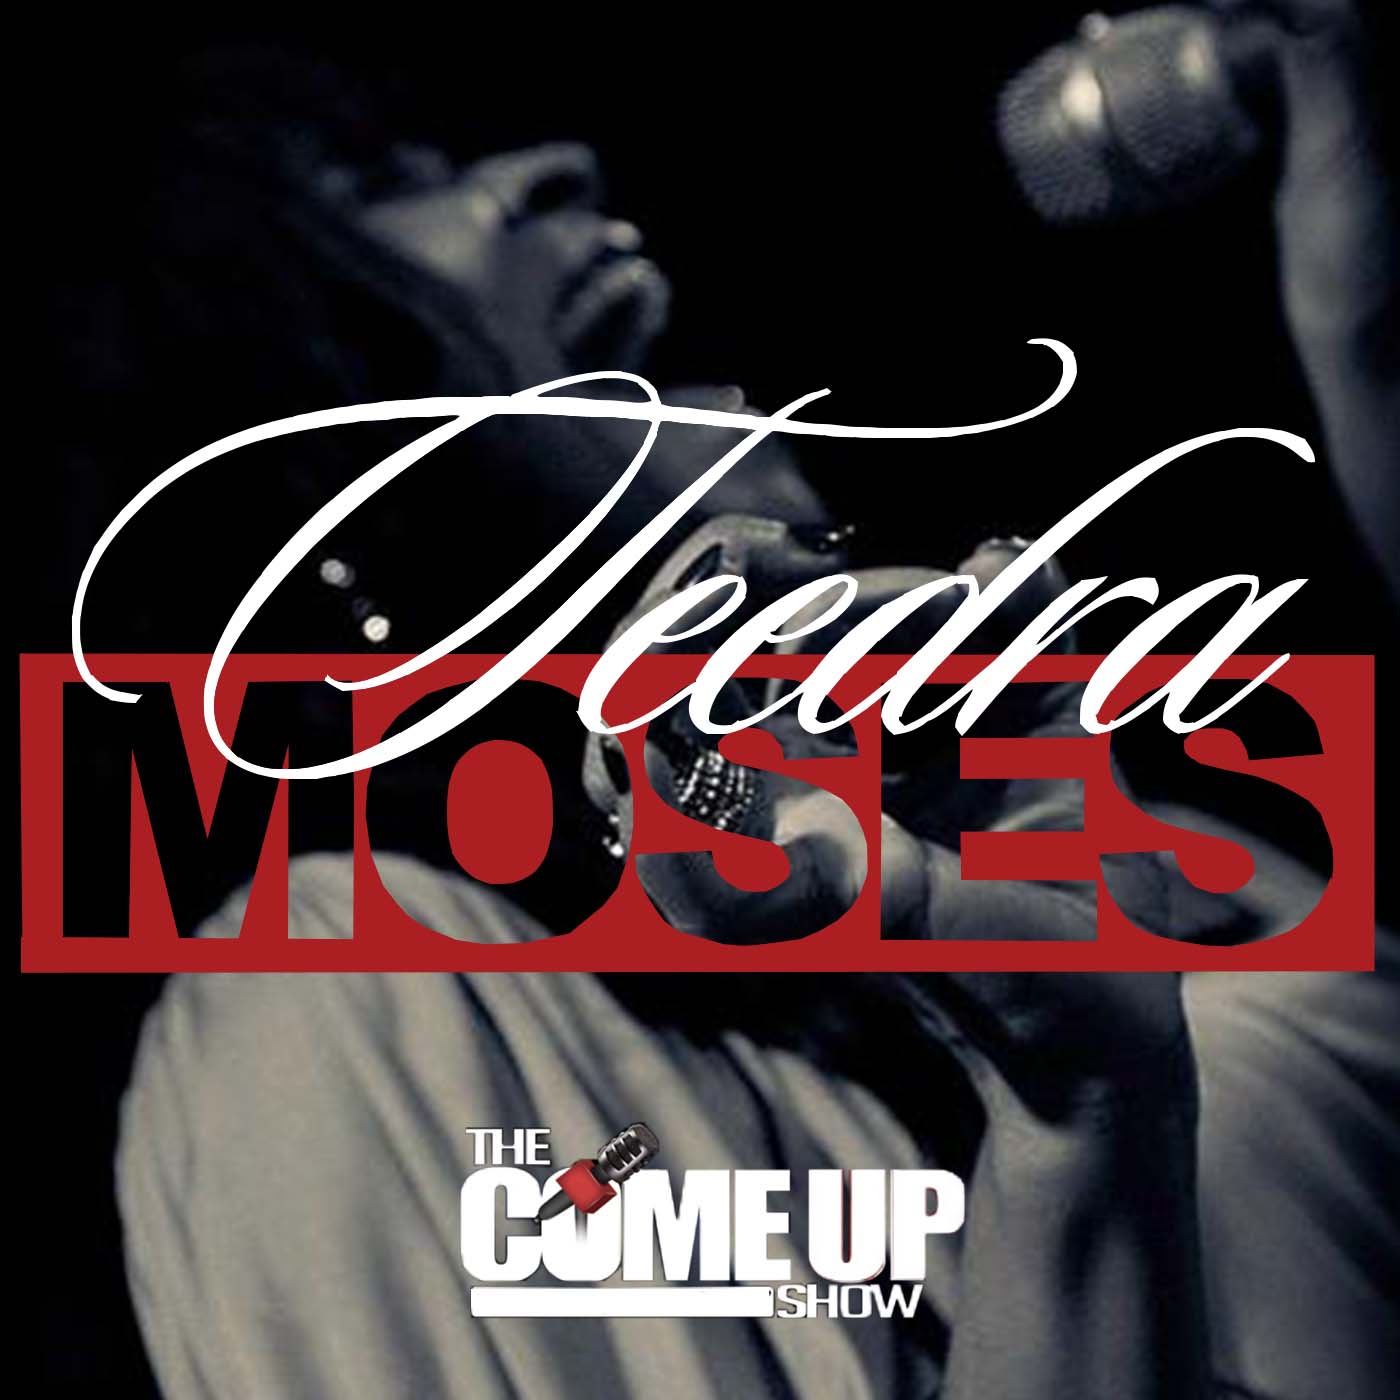 Thumbnail for "Teedra Moses talks her mother's influence, overcoming obstacles, and what music means to her".